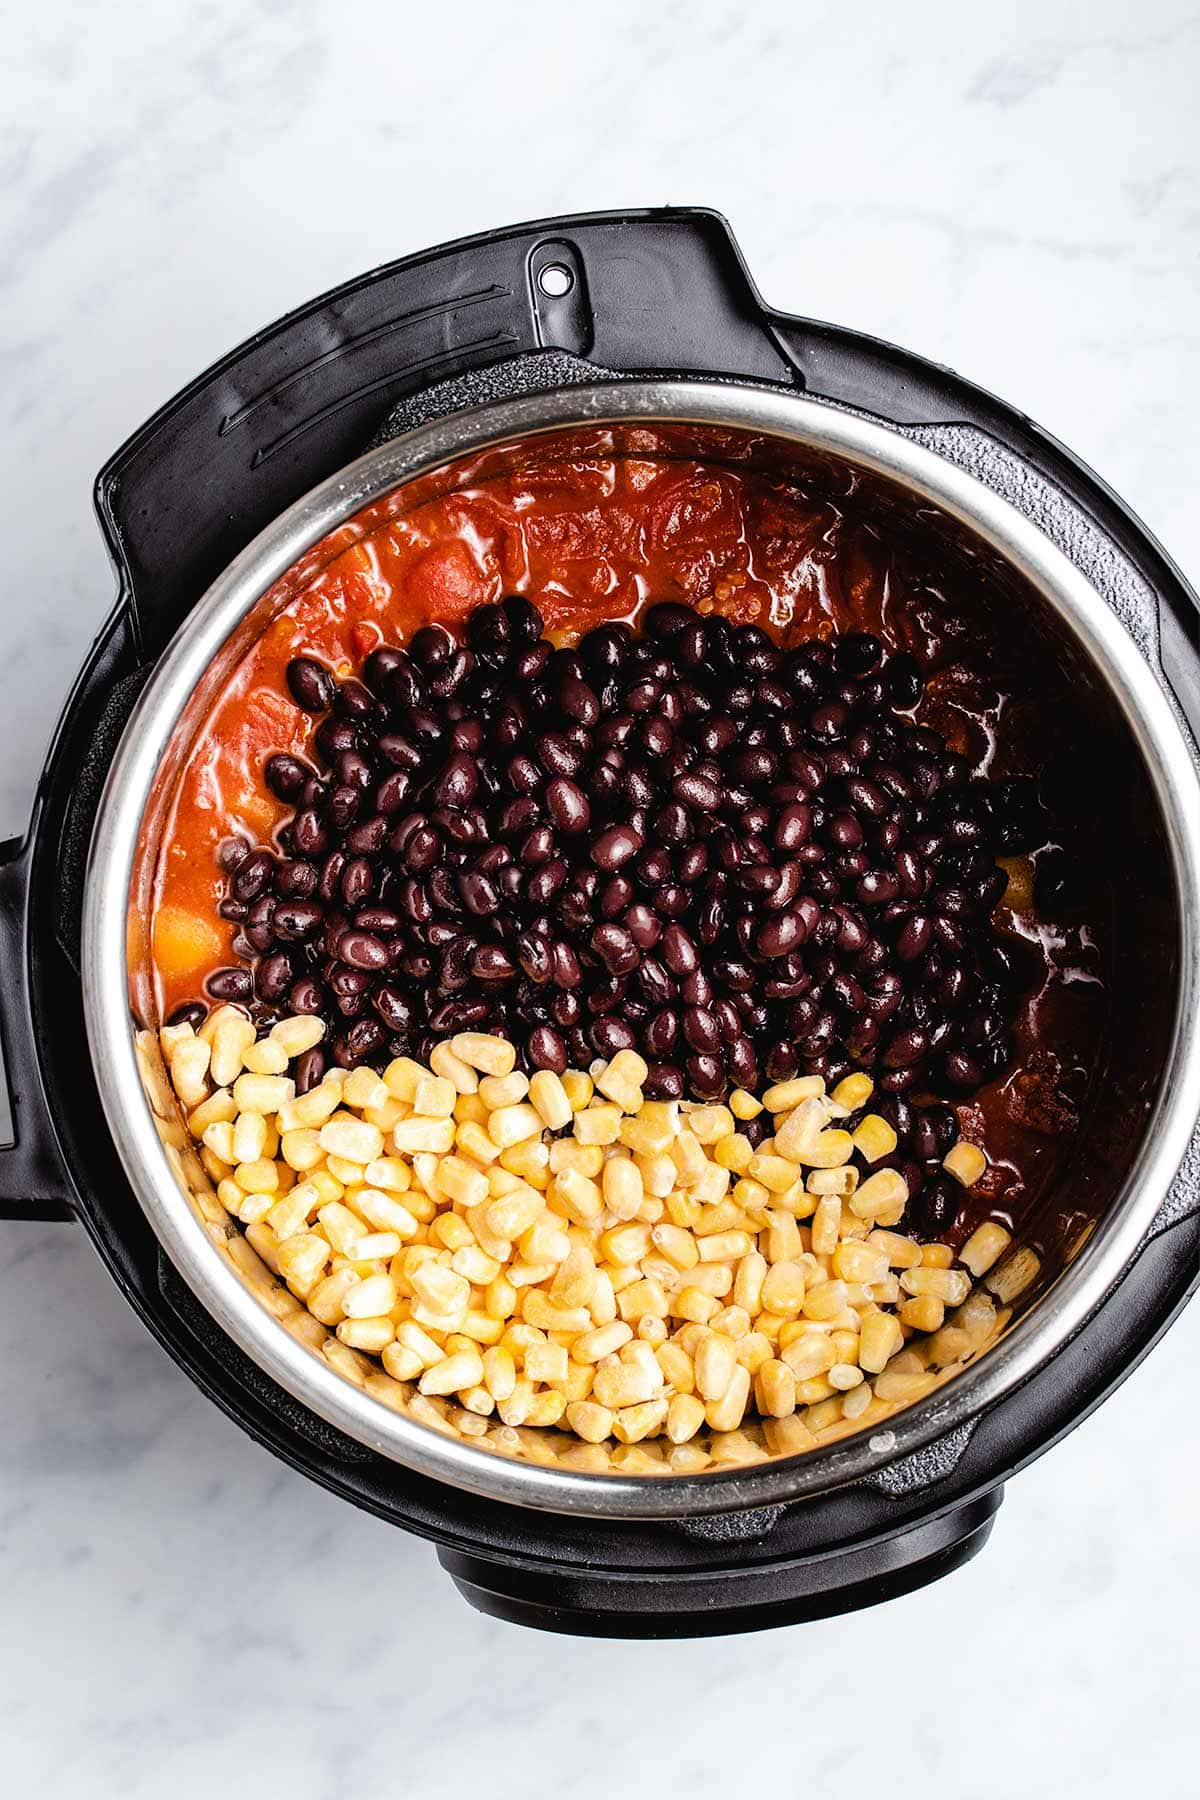 corn and black beans being added to vegan chili in an Instant Pot